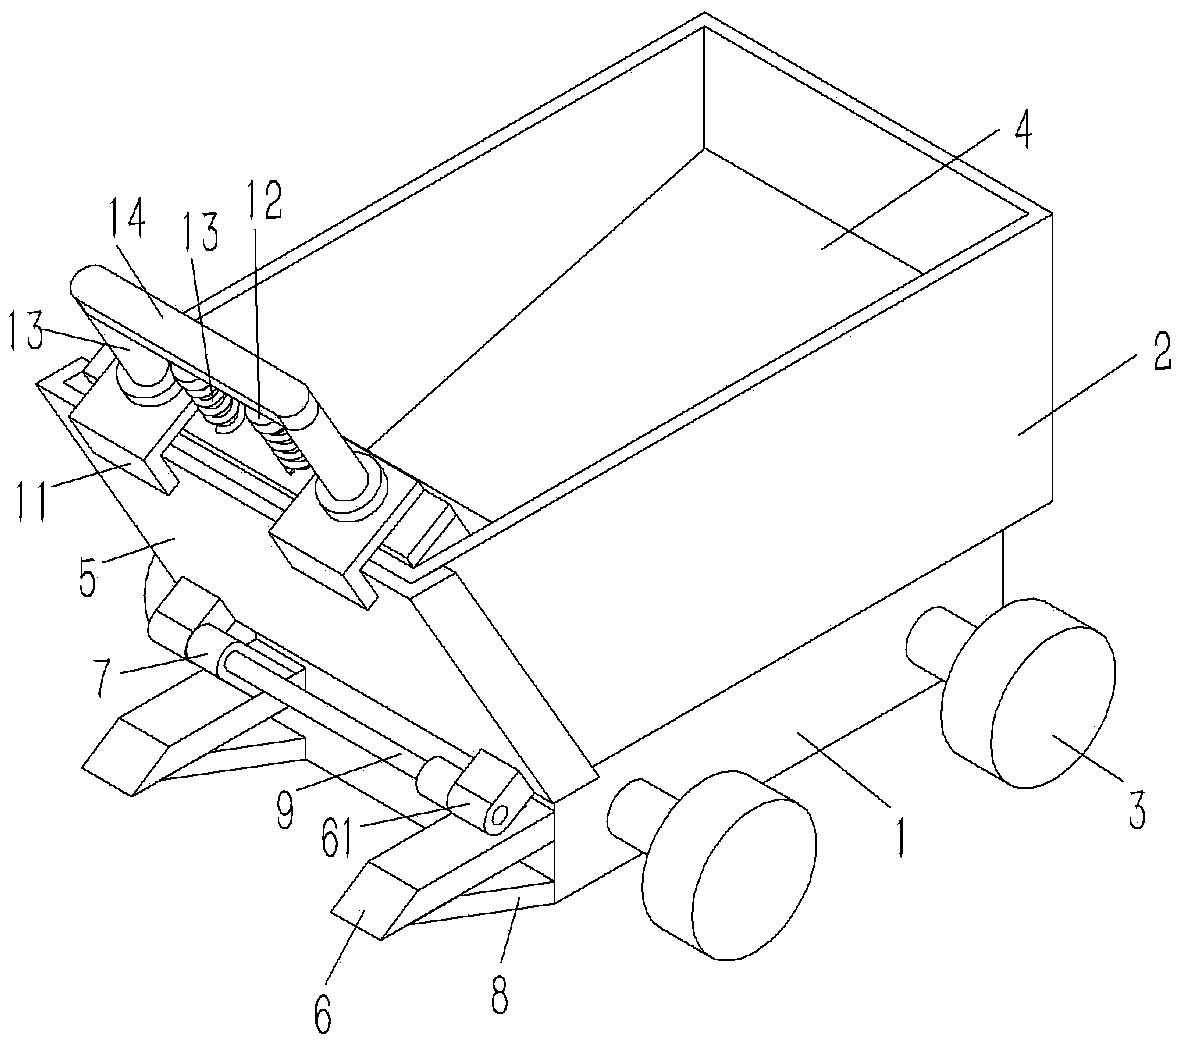 Transfer trolley for transporting minerals